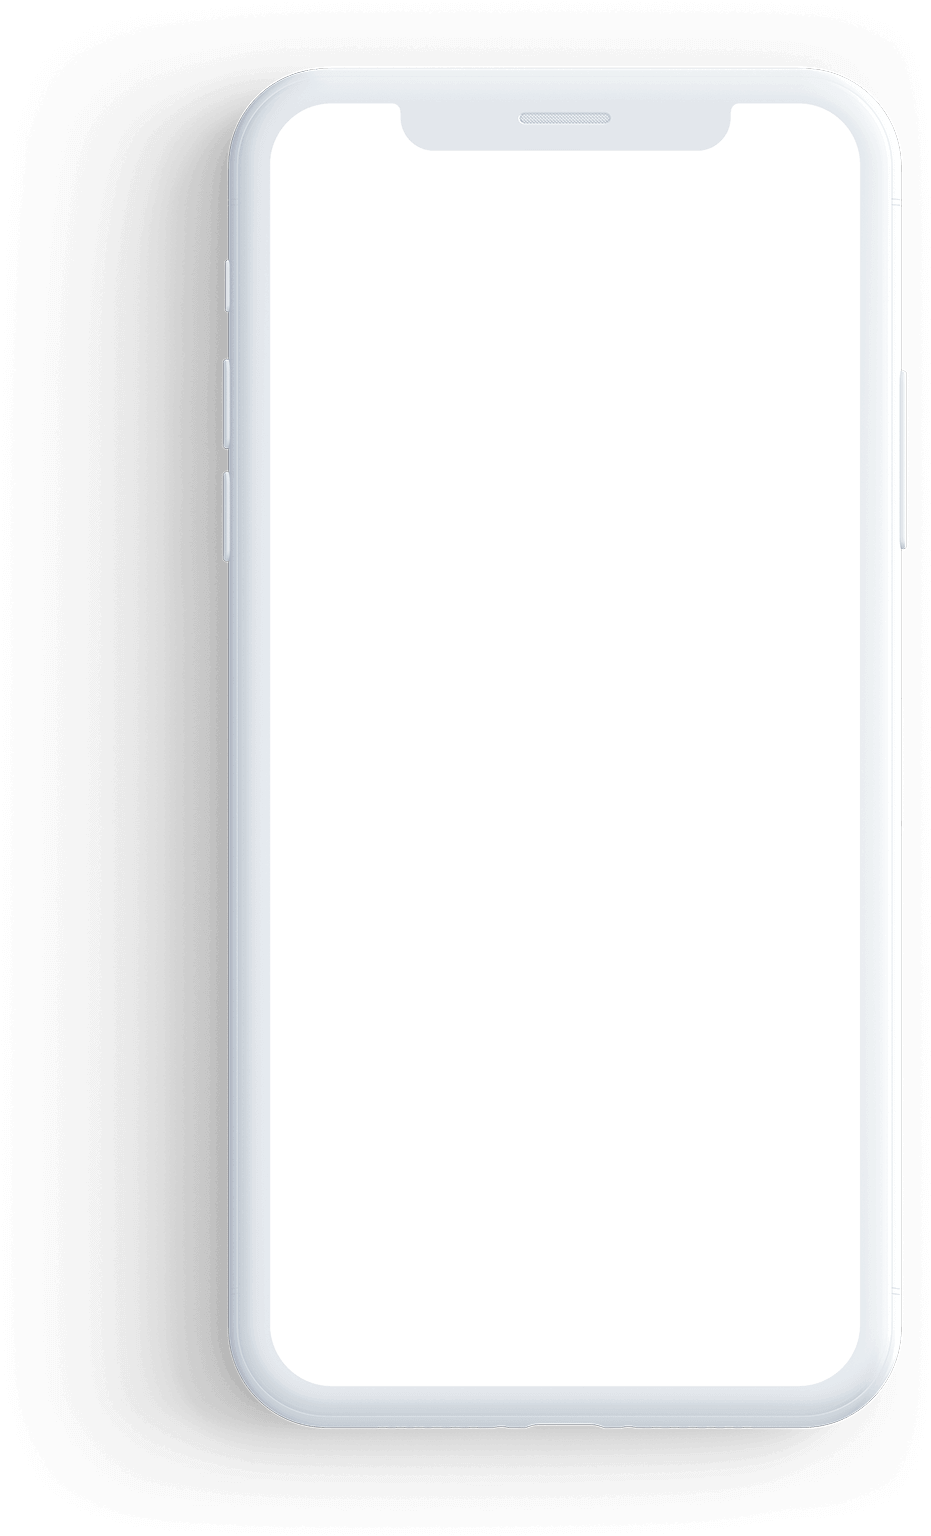 Smartphone Blank Screen Template PNG